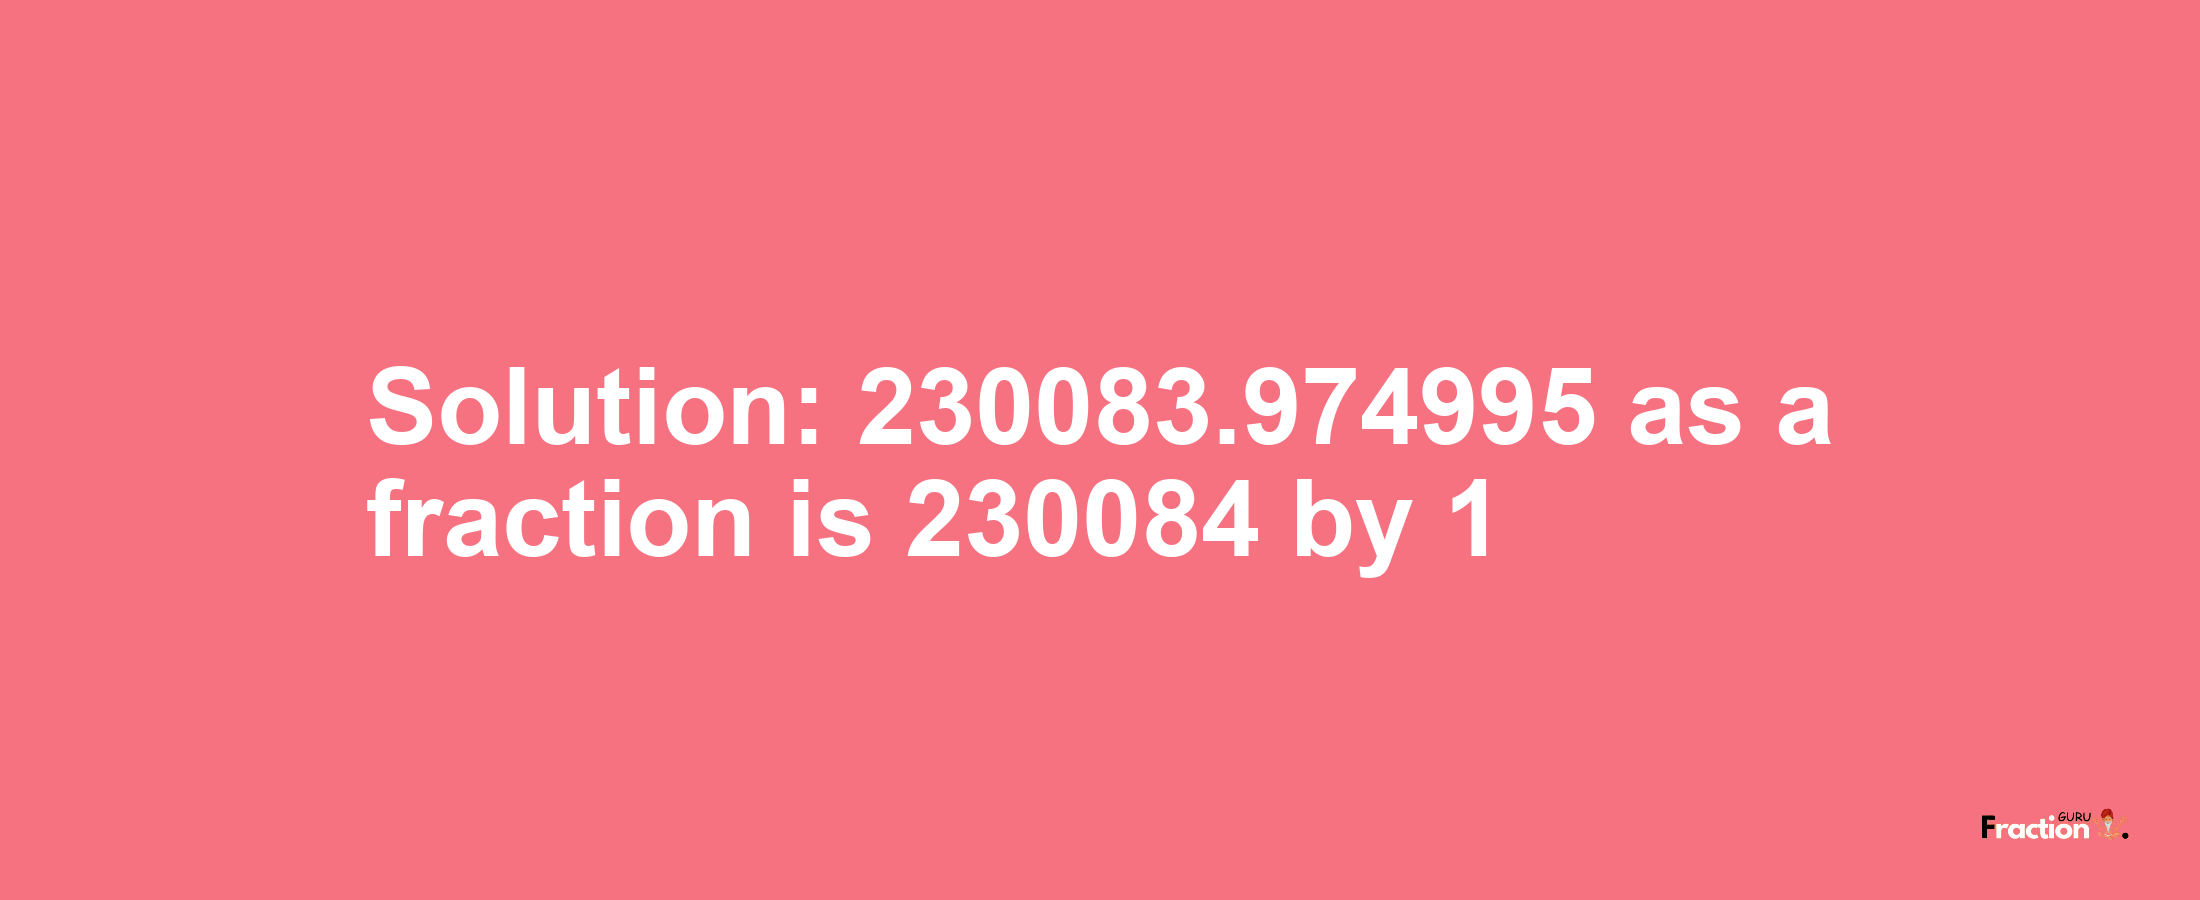 Solution:230083.974995 as a fraction is 230084/1